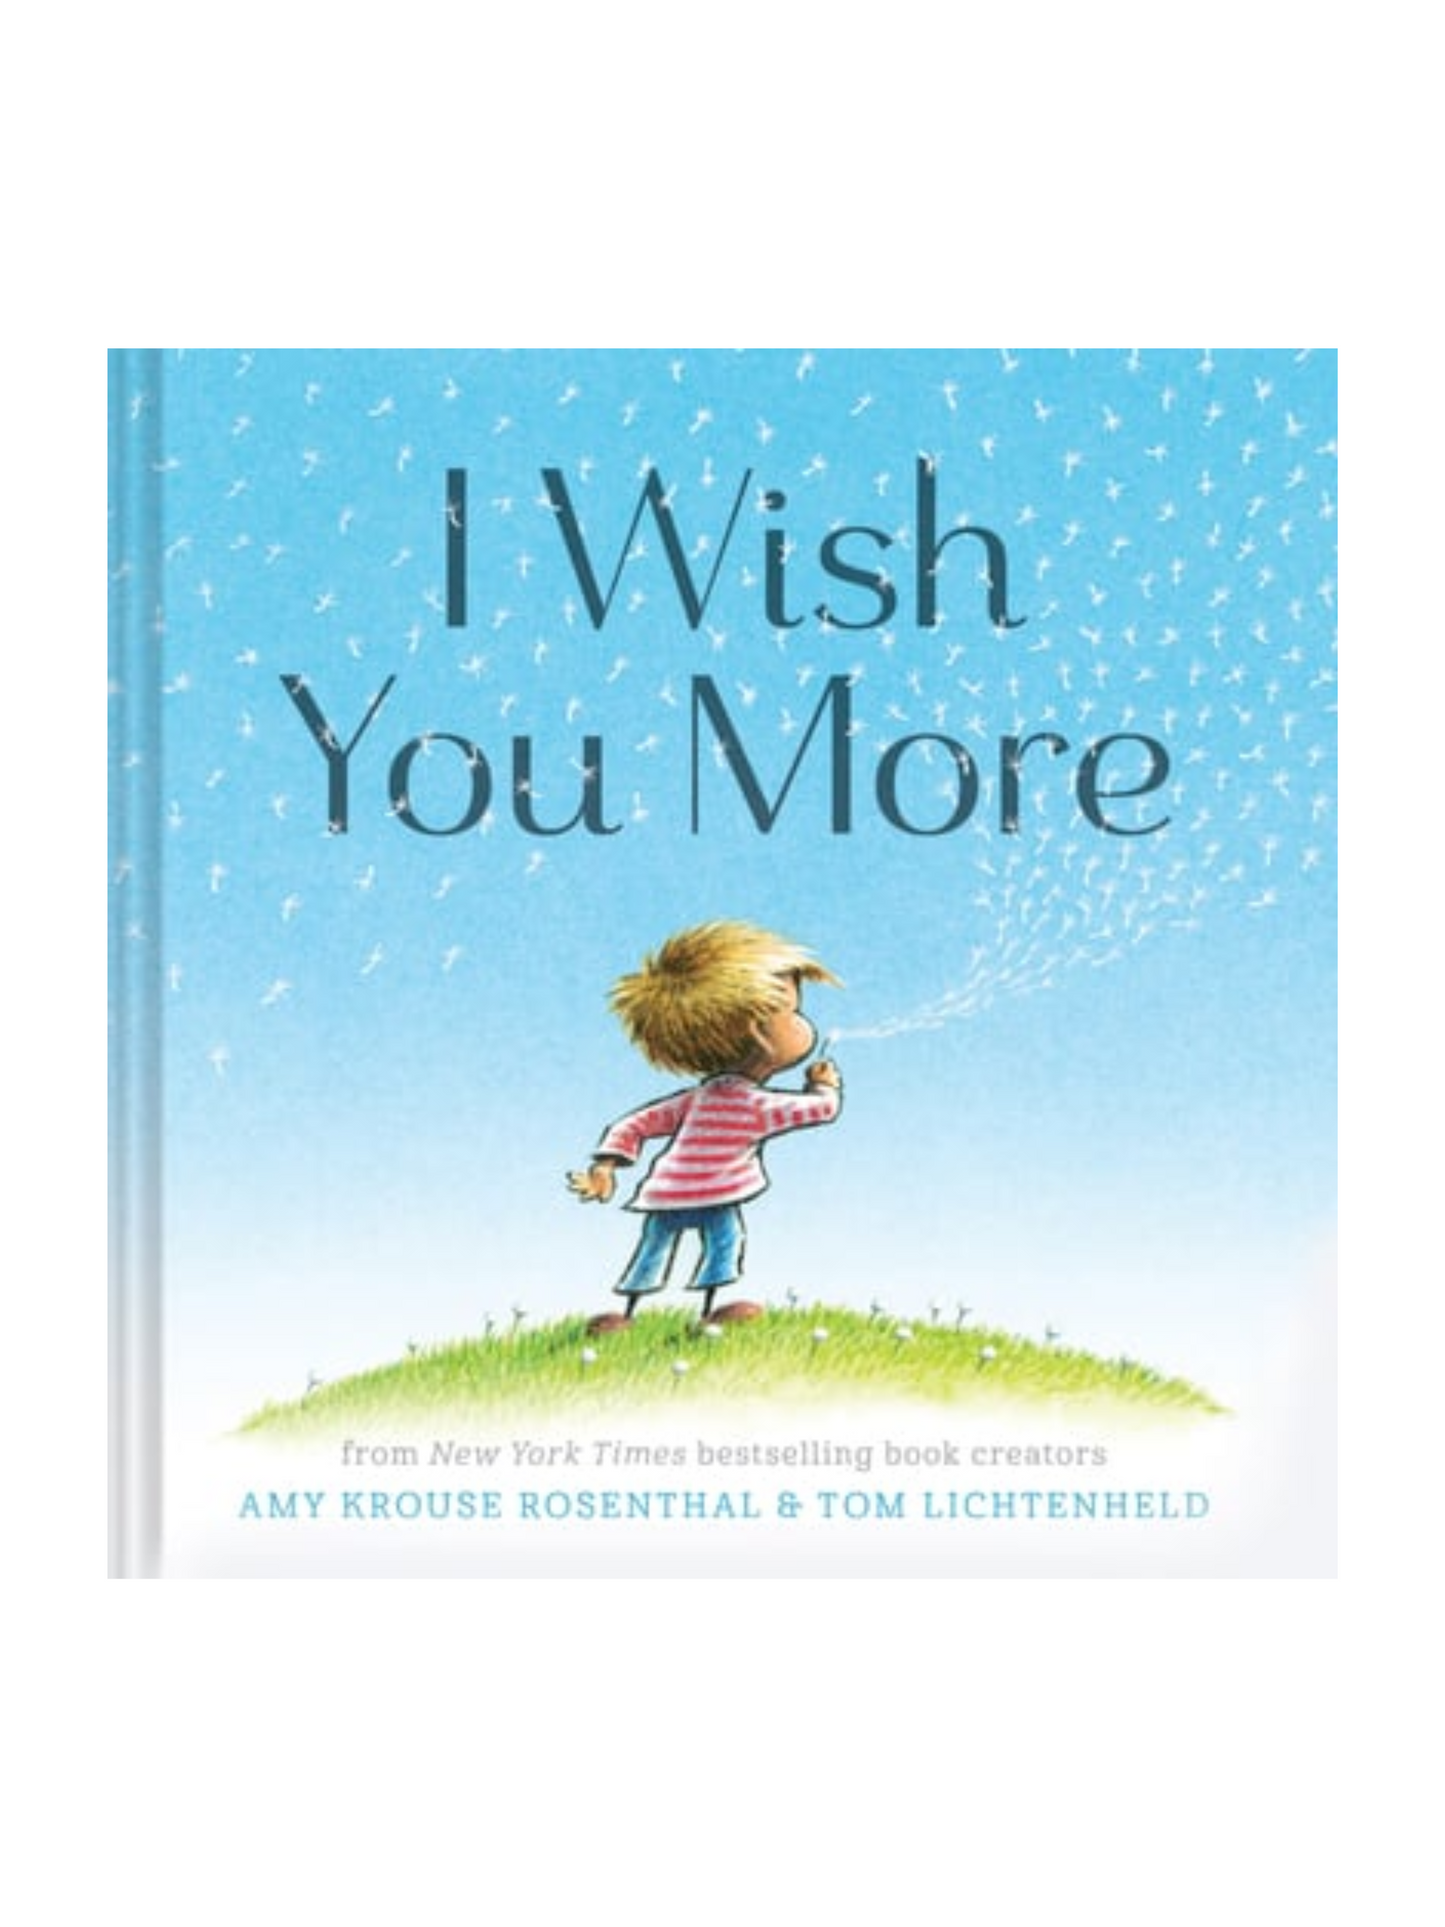 I WISH YOU MORE CHILDREN'S BOOK - THE LITTLE EAGLE BOUTIQUE